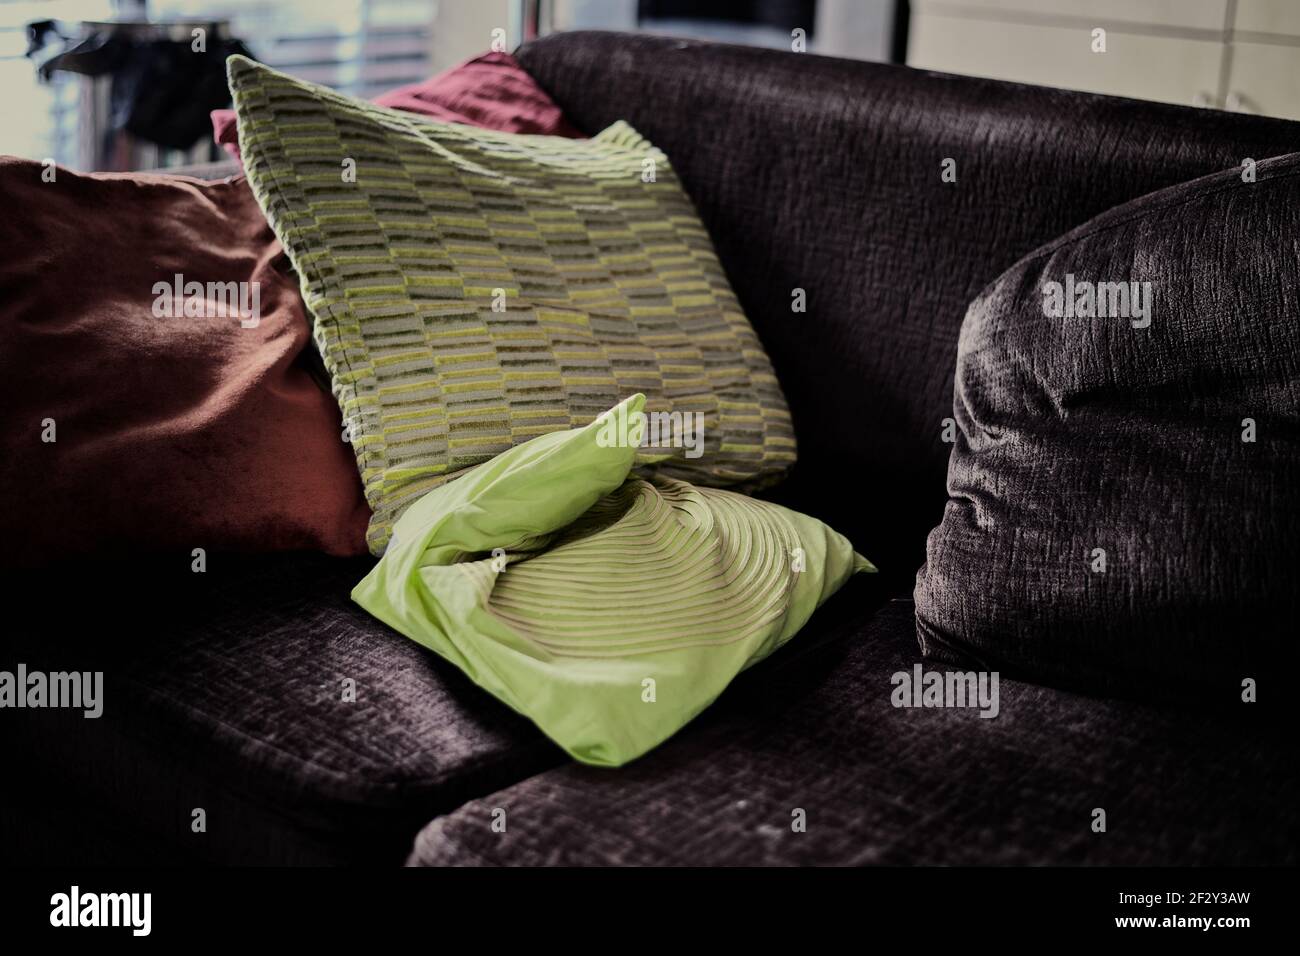 High contrast image of green cushions on a sofa in interior setting Stock Photo